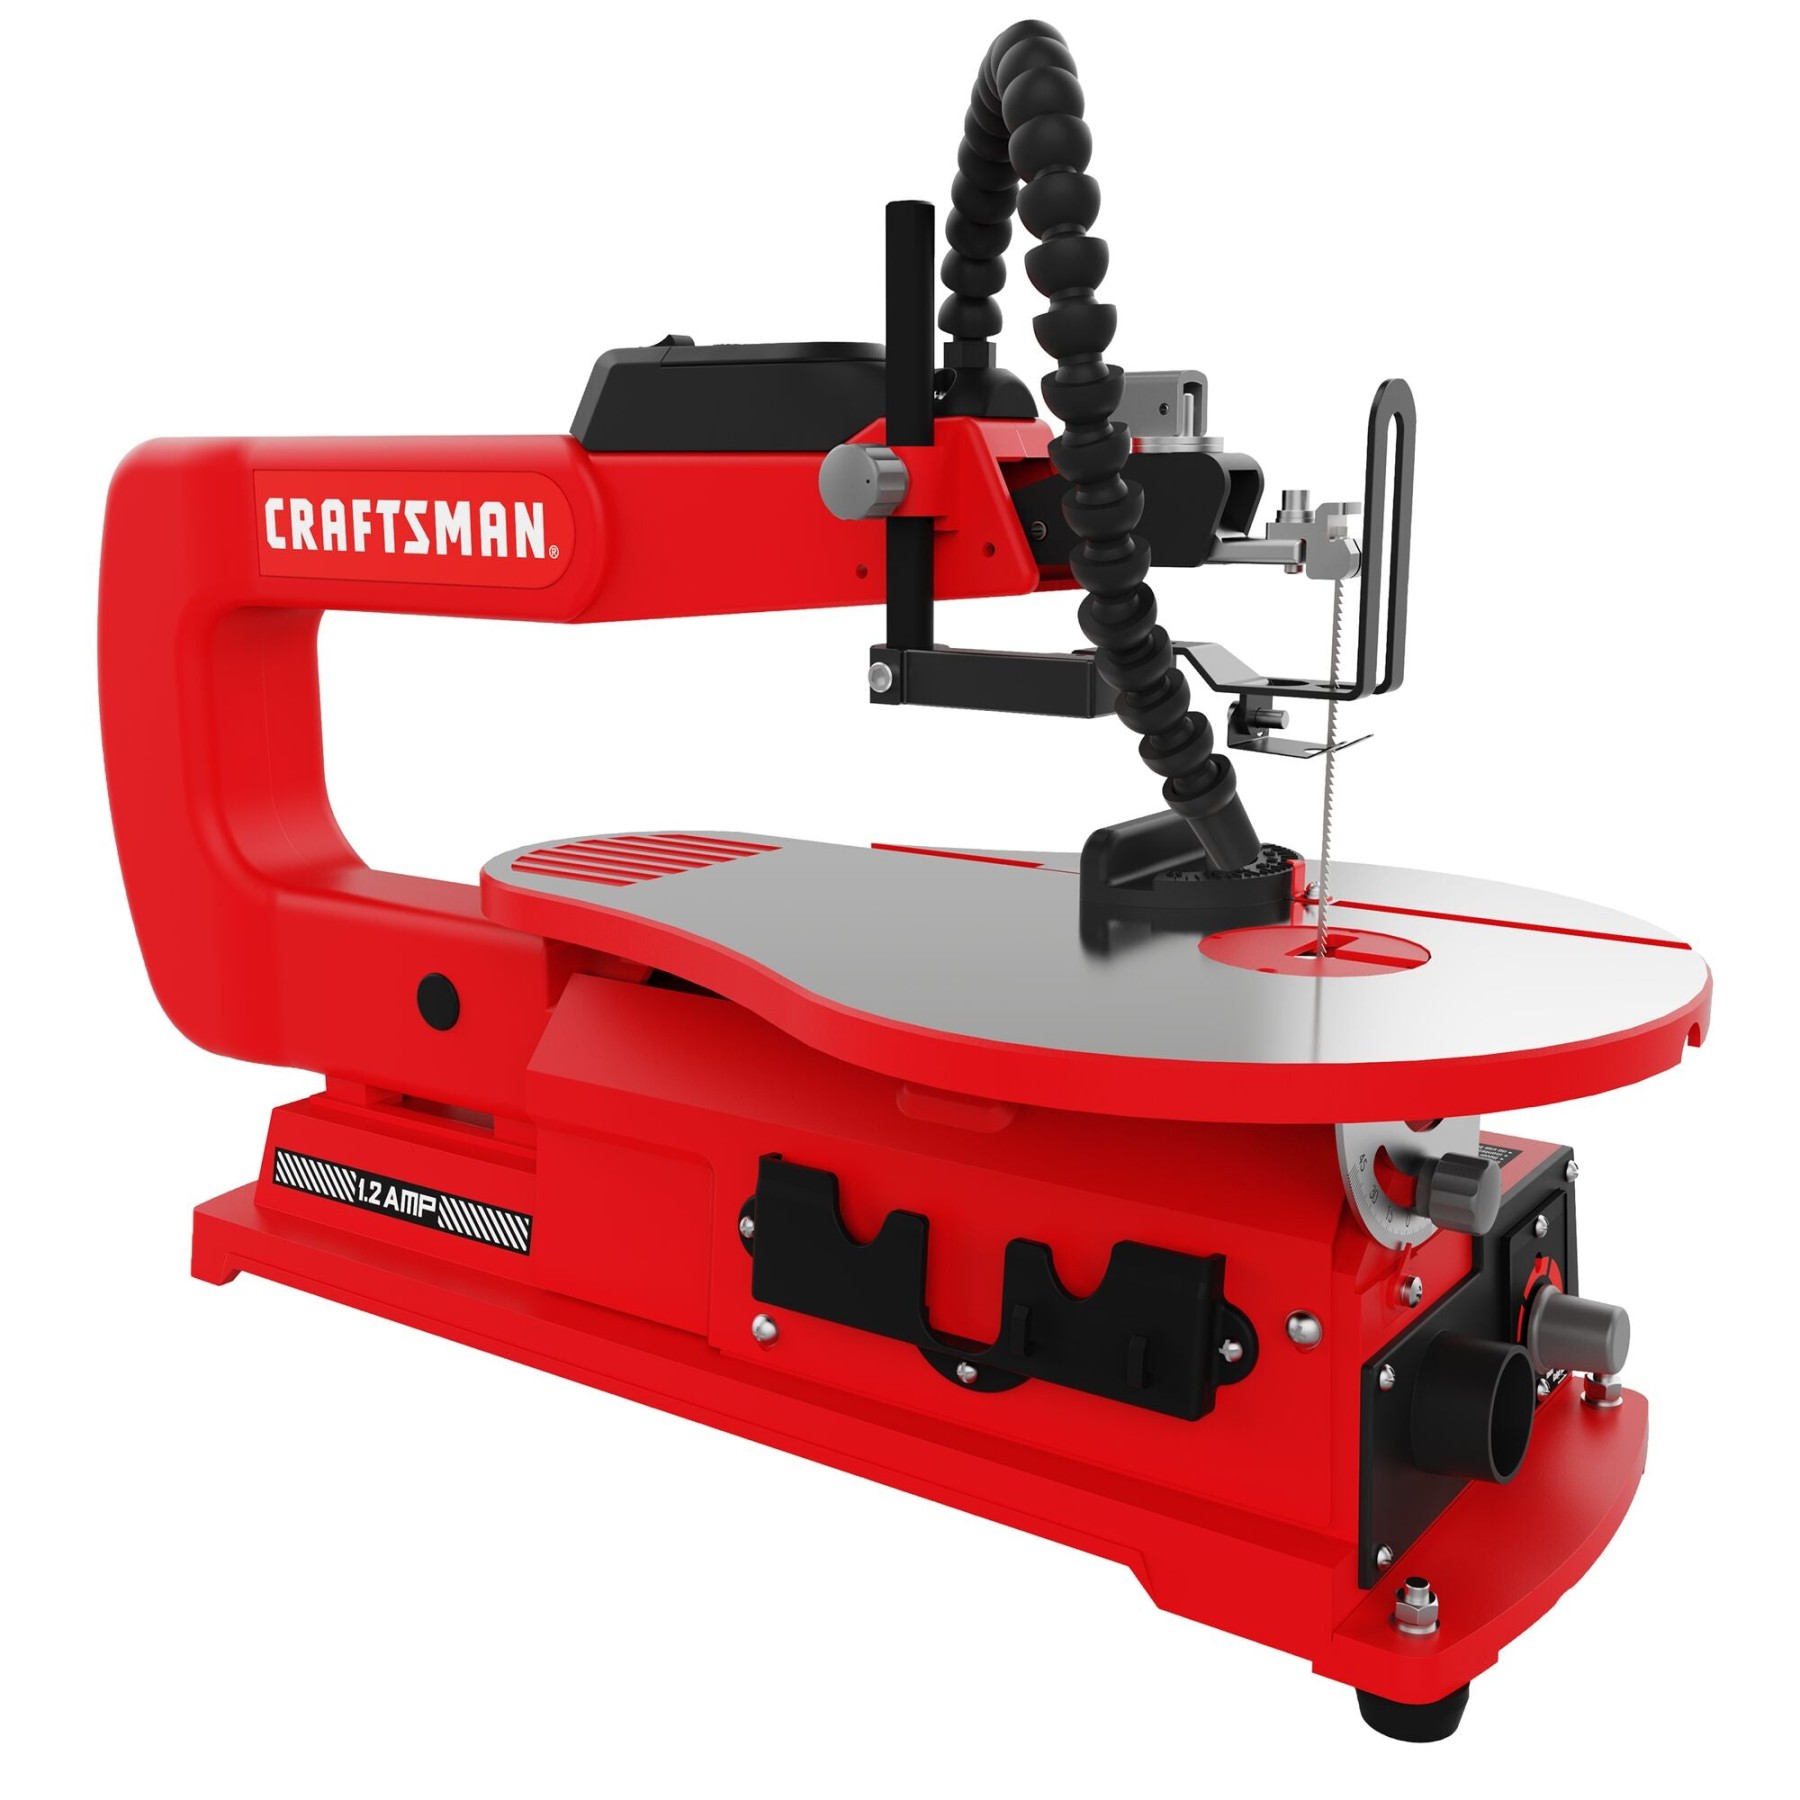 in-variable-scroll-saw-craftsman Craftsman Scroll Saw Review: Cutting Through the Competition? picture